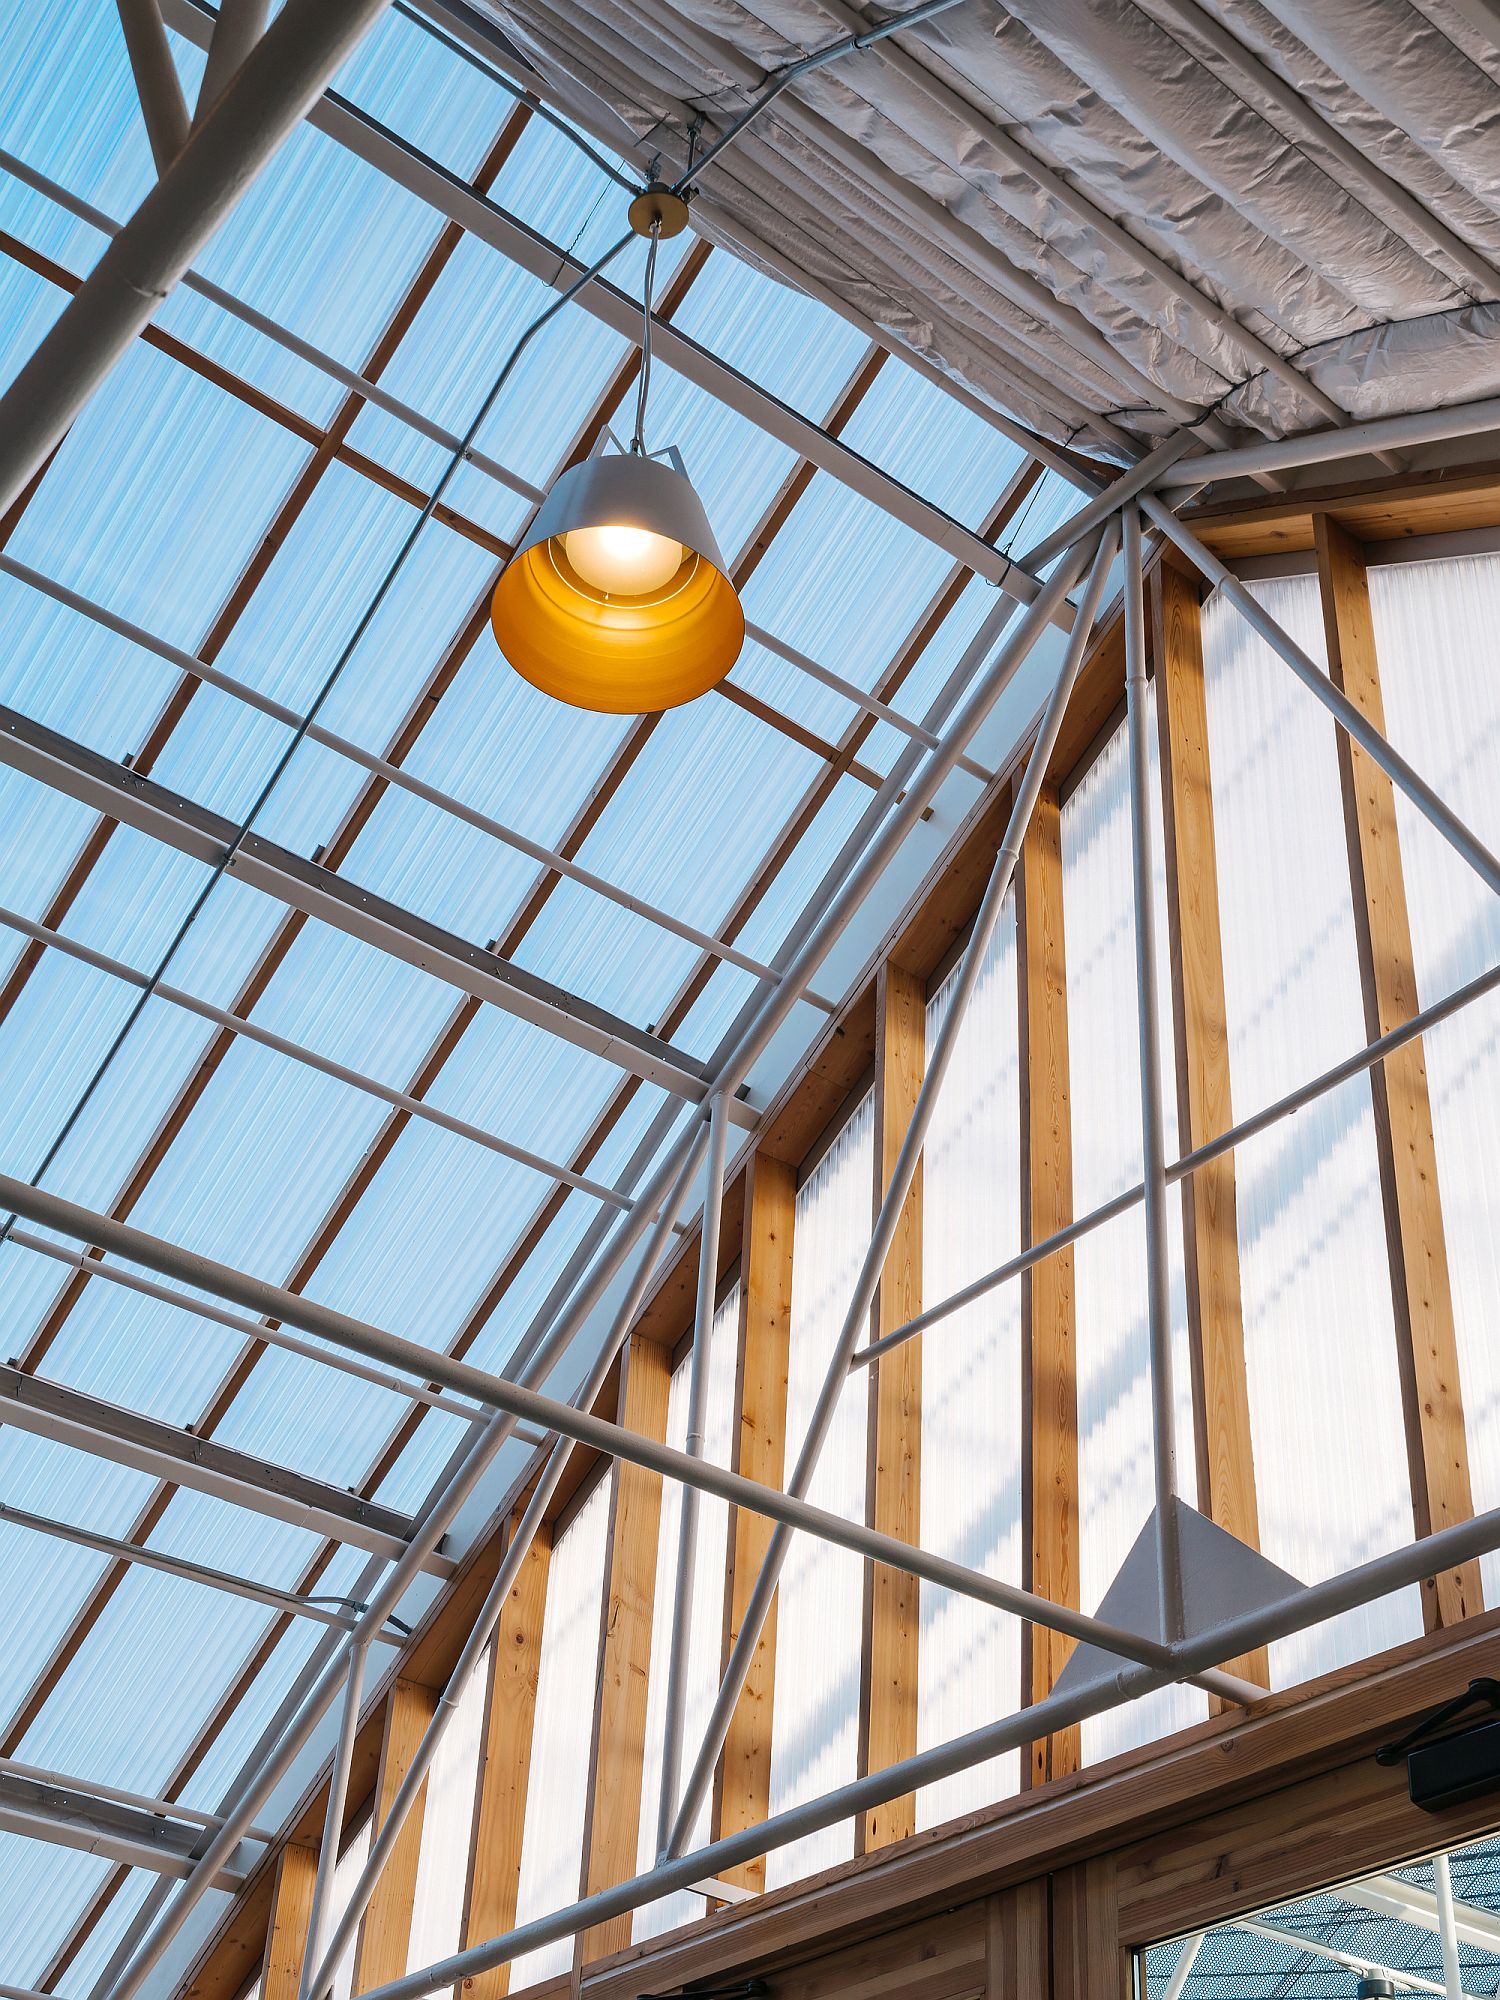 Polycarbonate-panels-and-industrial-lighting-inside-the-cafe